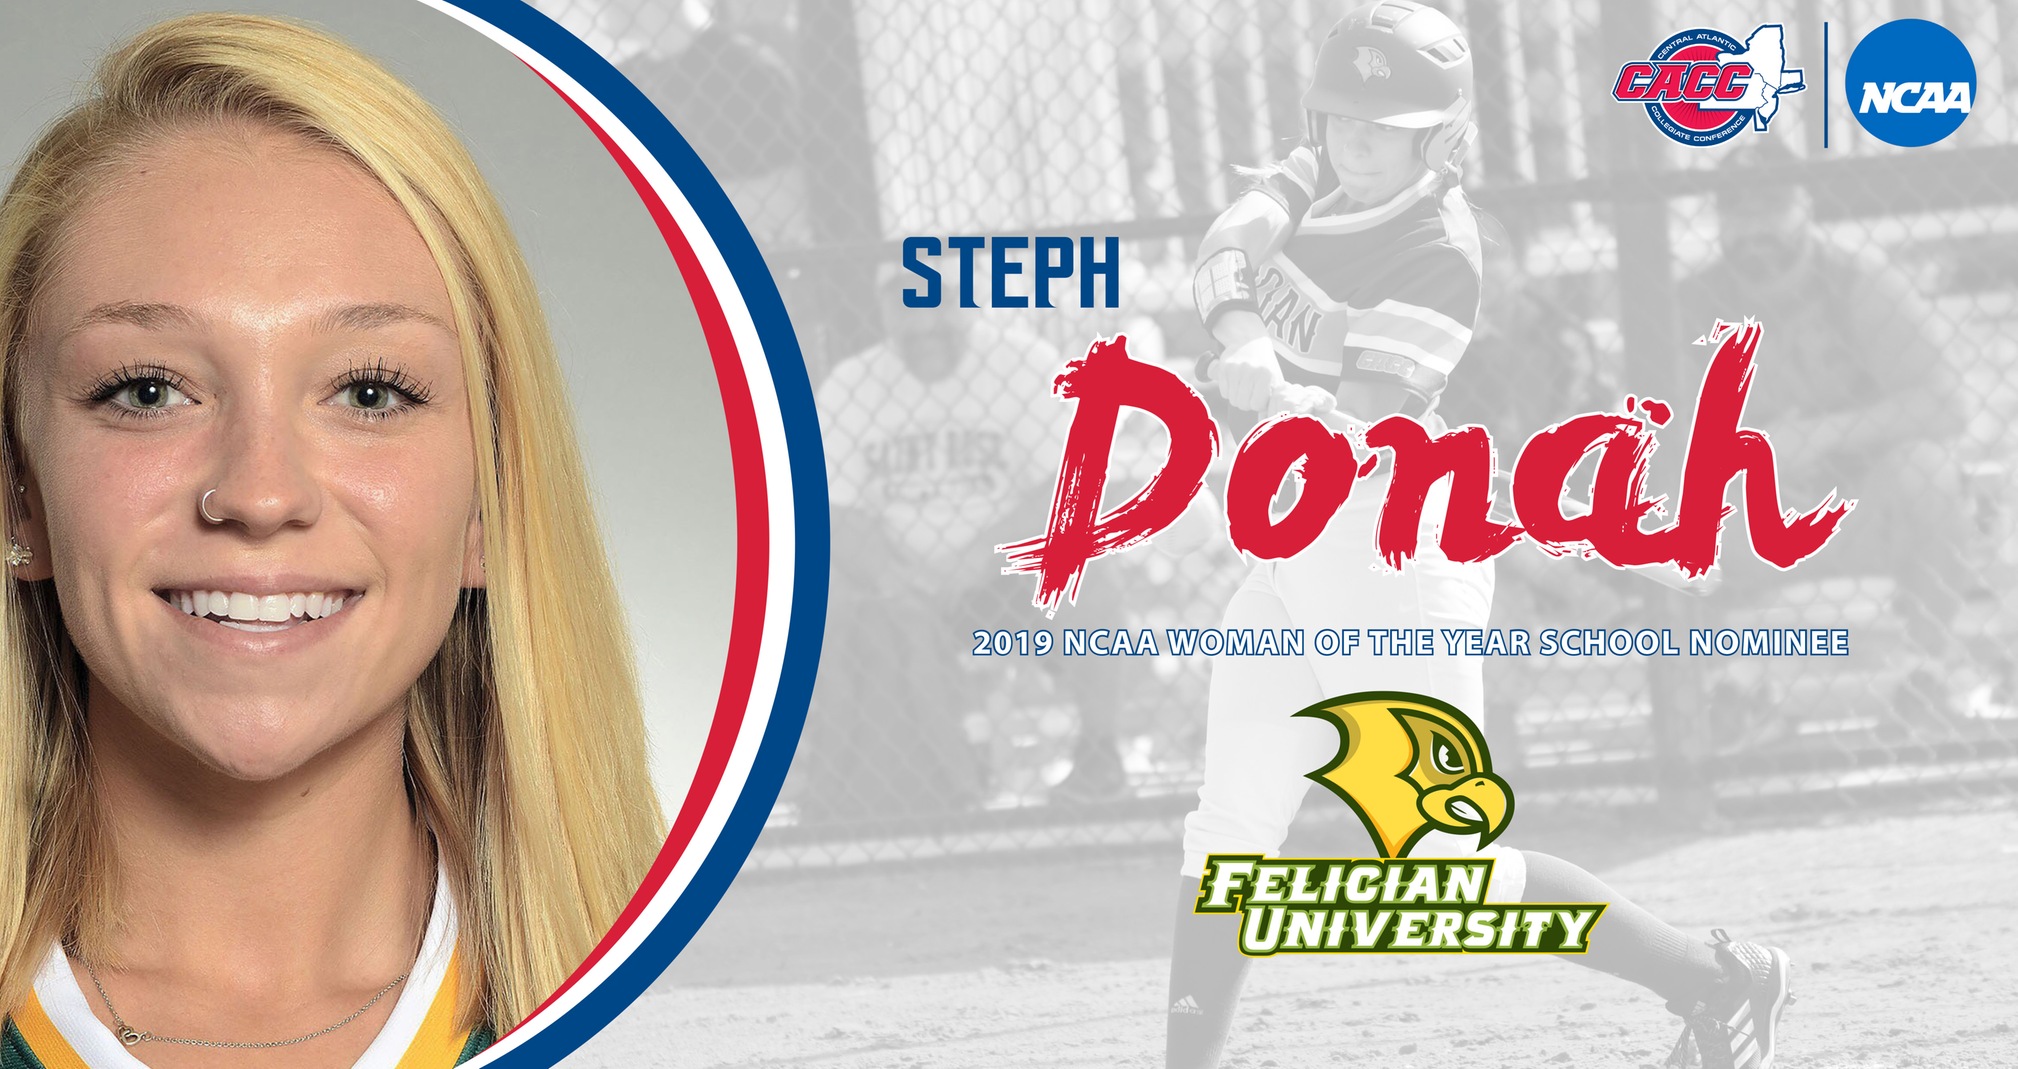 NCAA WOMAN OF THE YEAR NOMINEE: Steph Donah (Felician University)